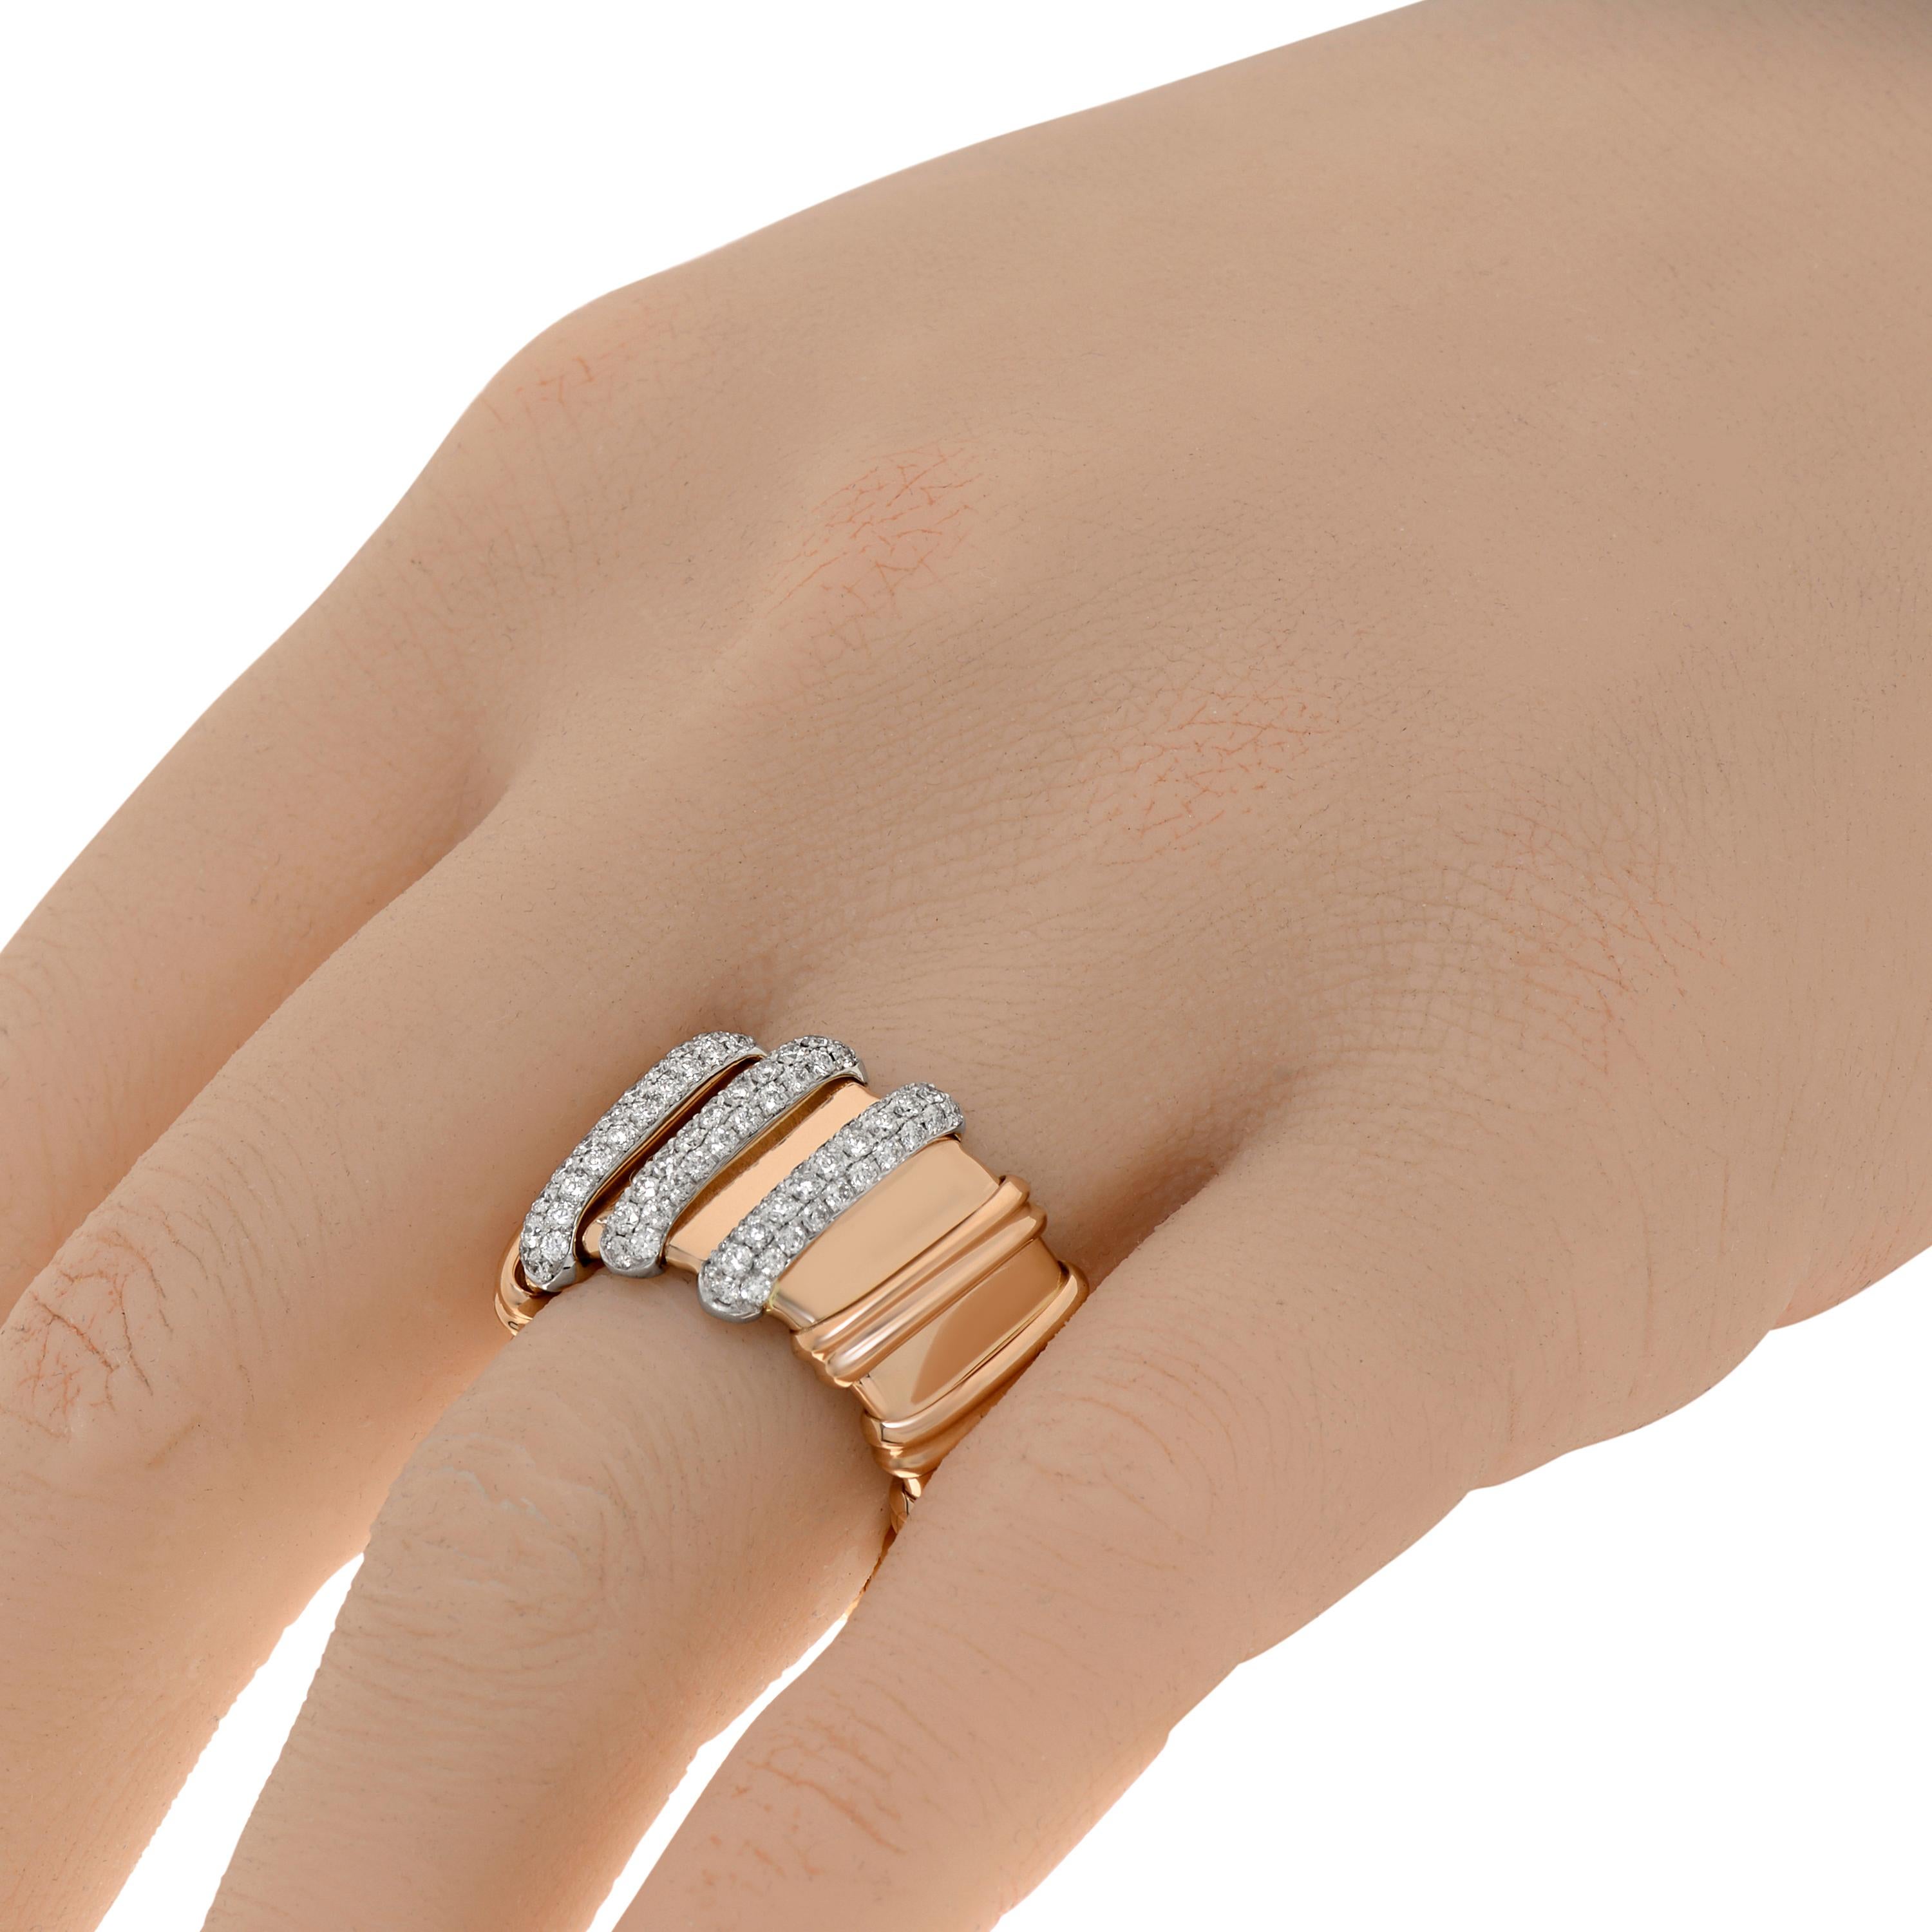 This classic Roberto Coin 18k rose gold band ring features 0.85ct tw diamonds. The band is flexible and sized at 5.75. The band's width is 15mm. The total weight is 16.0g. This designer jewelry is shipped with a Roberto Coin Pouch.
